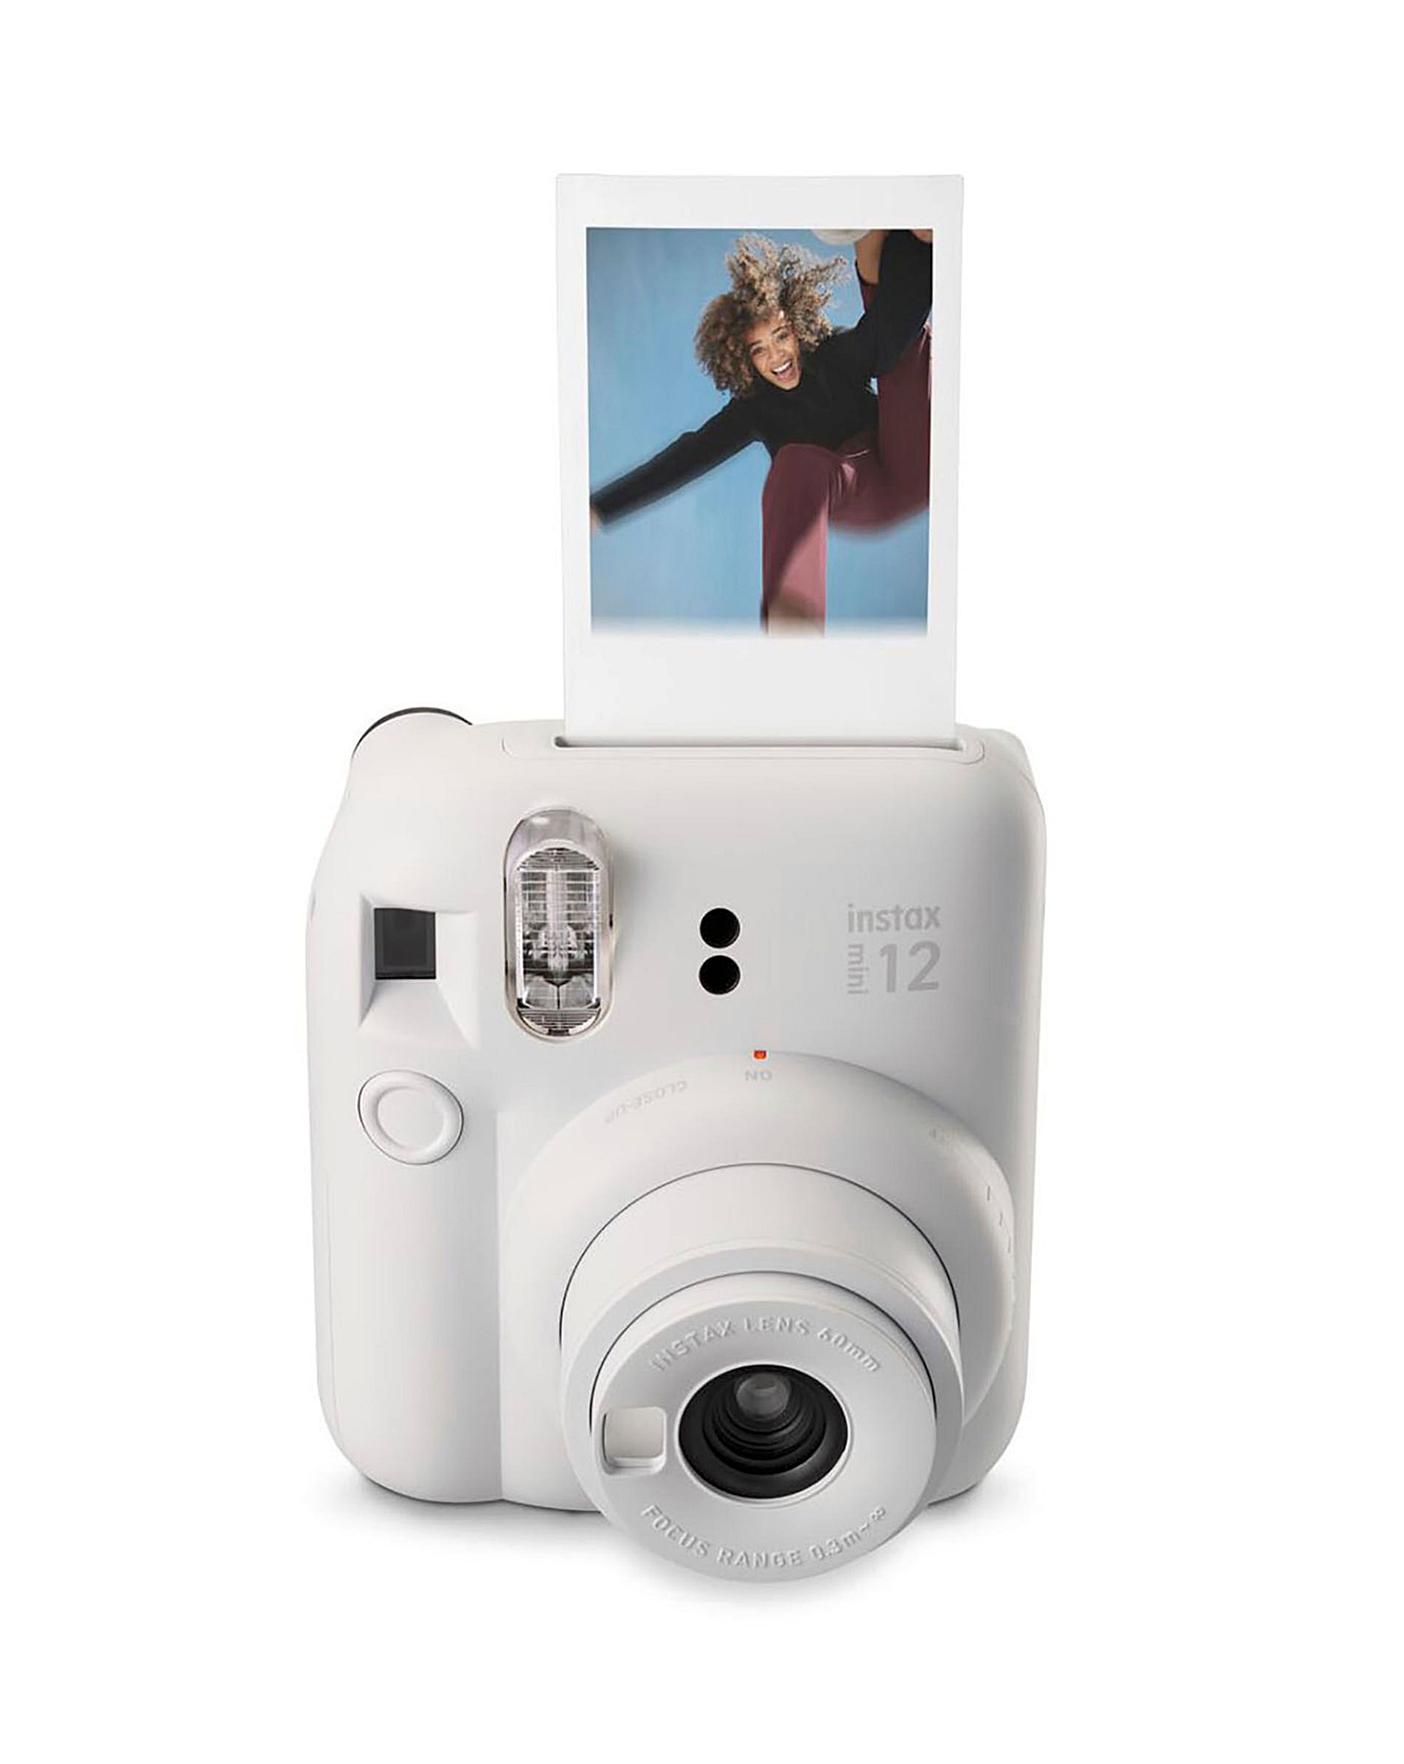 INSTAX MINI 12 Instant 2023 Holiday Camera Bundle - Lilac Purple *FREE  SHIPPING*